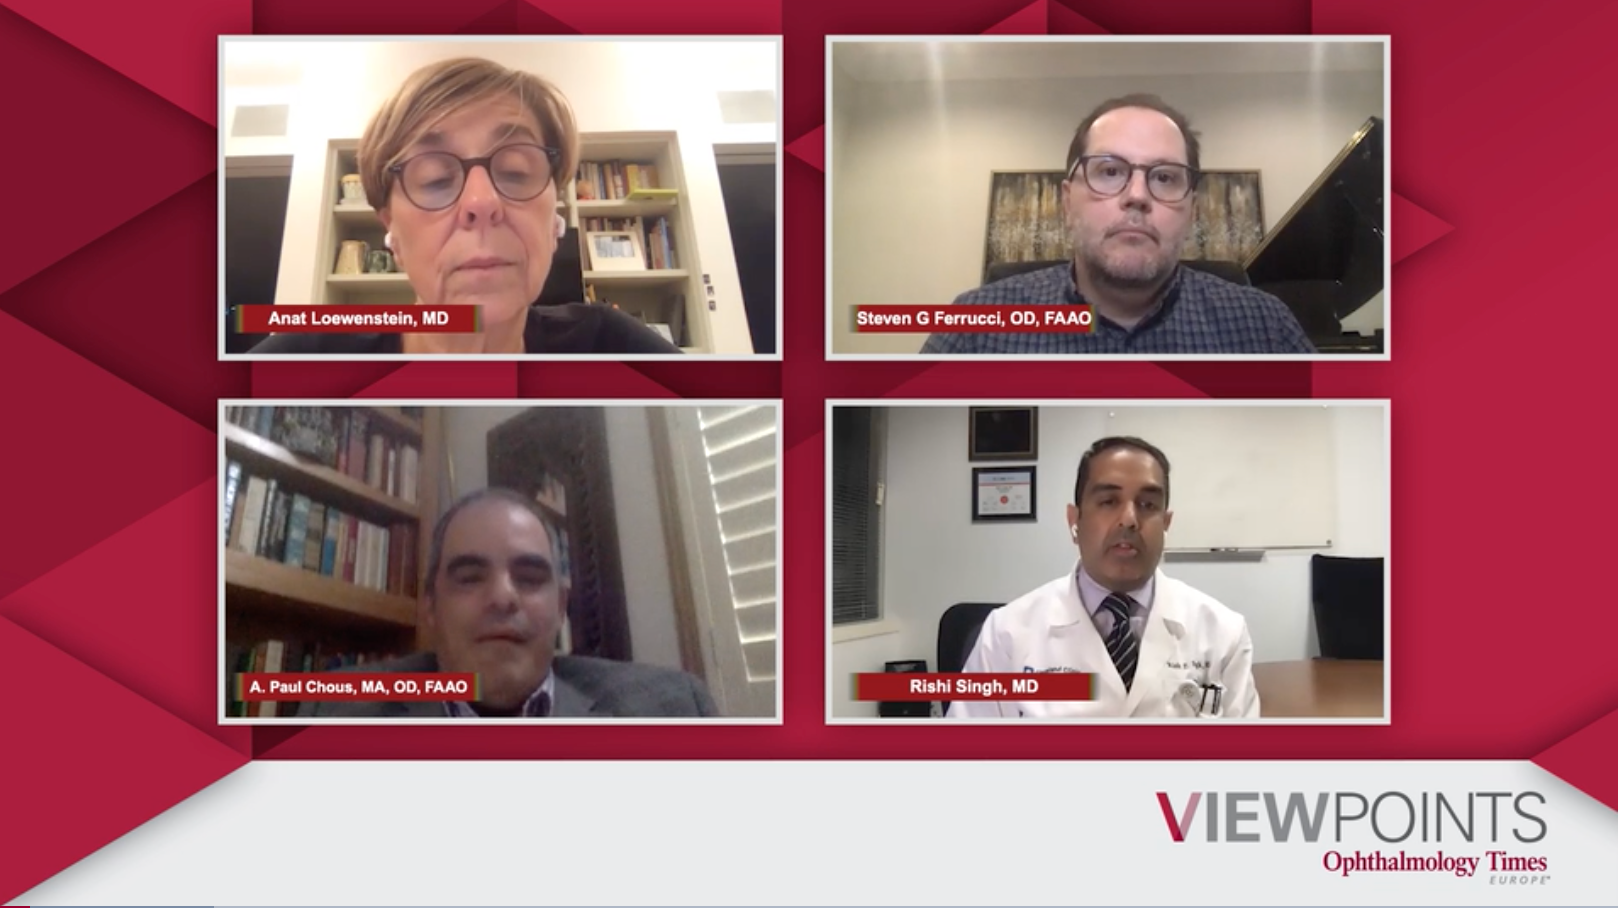 Impact of COVID-19 on management of DR/DME